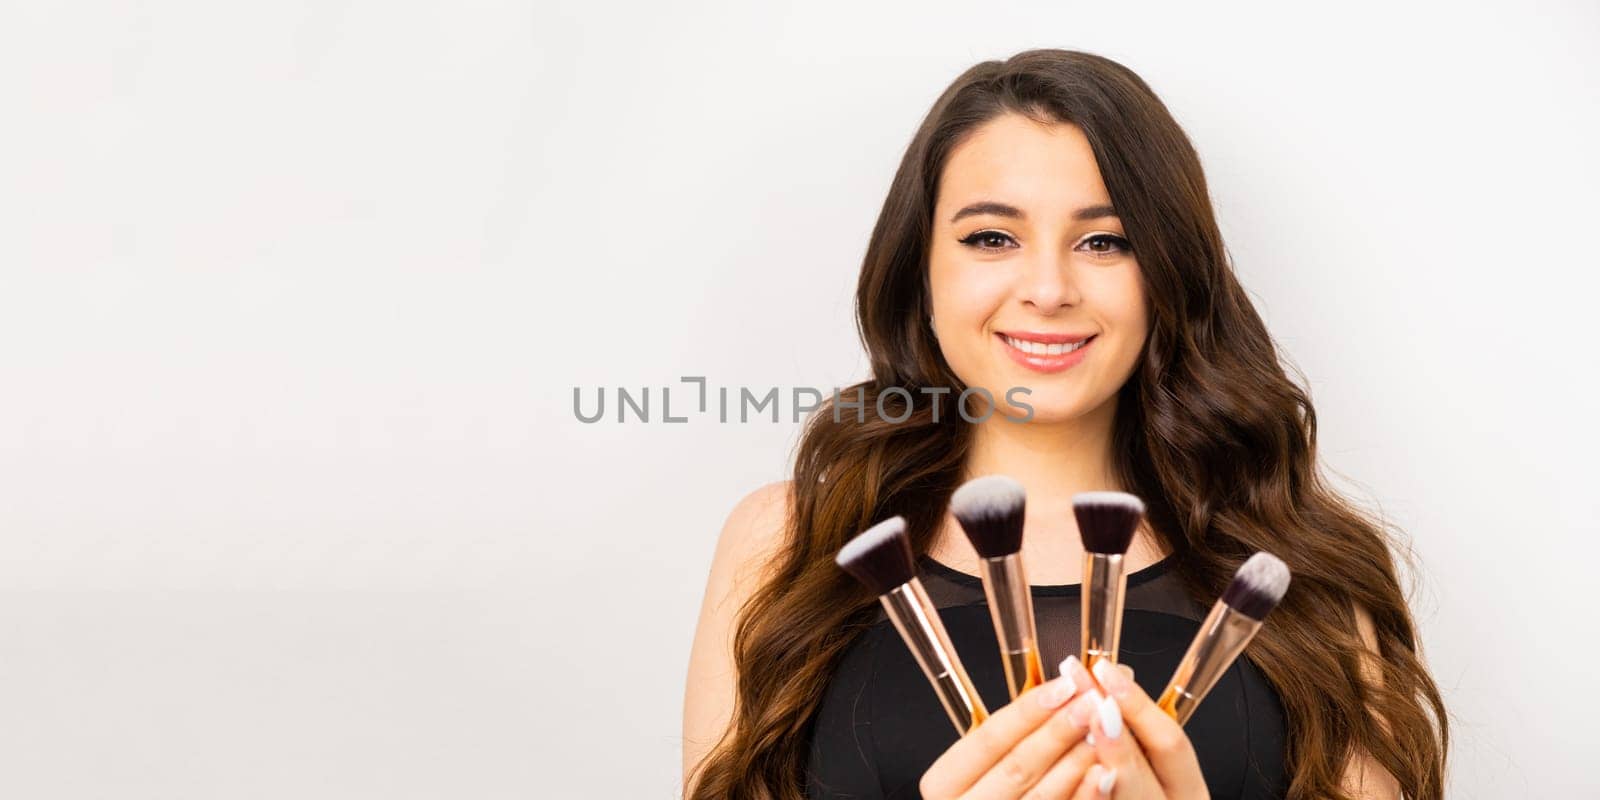 A smiling brunette woman holding makeup brushes on the white background.